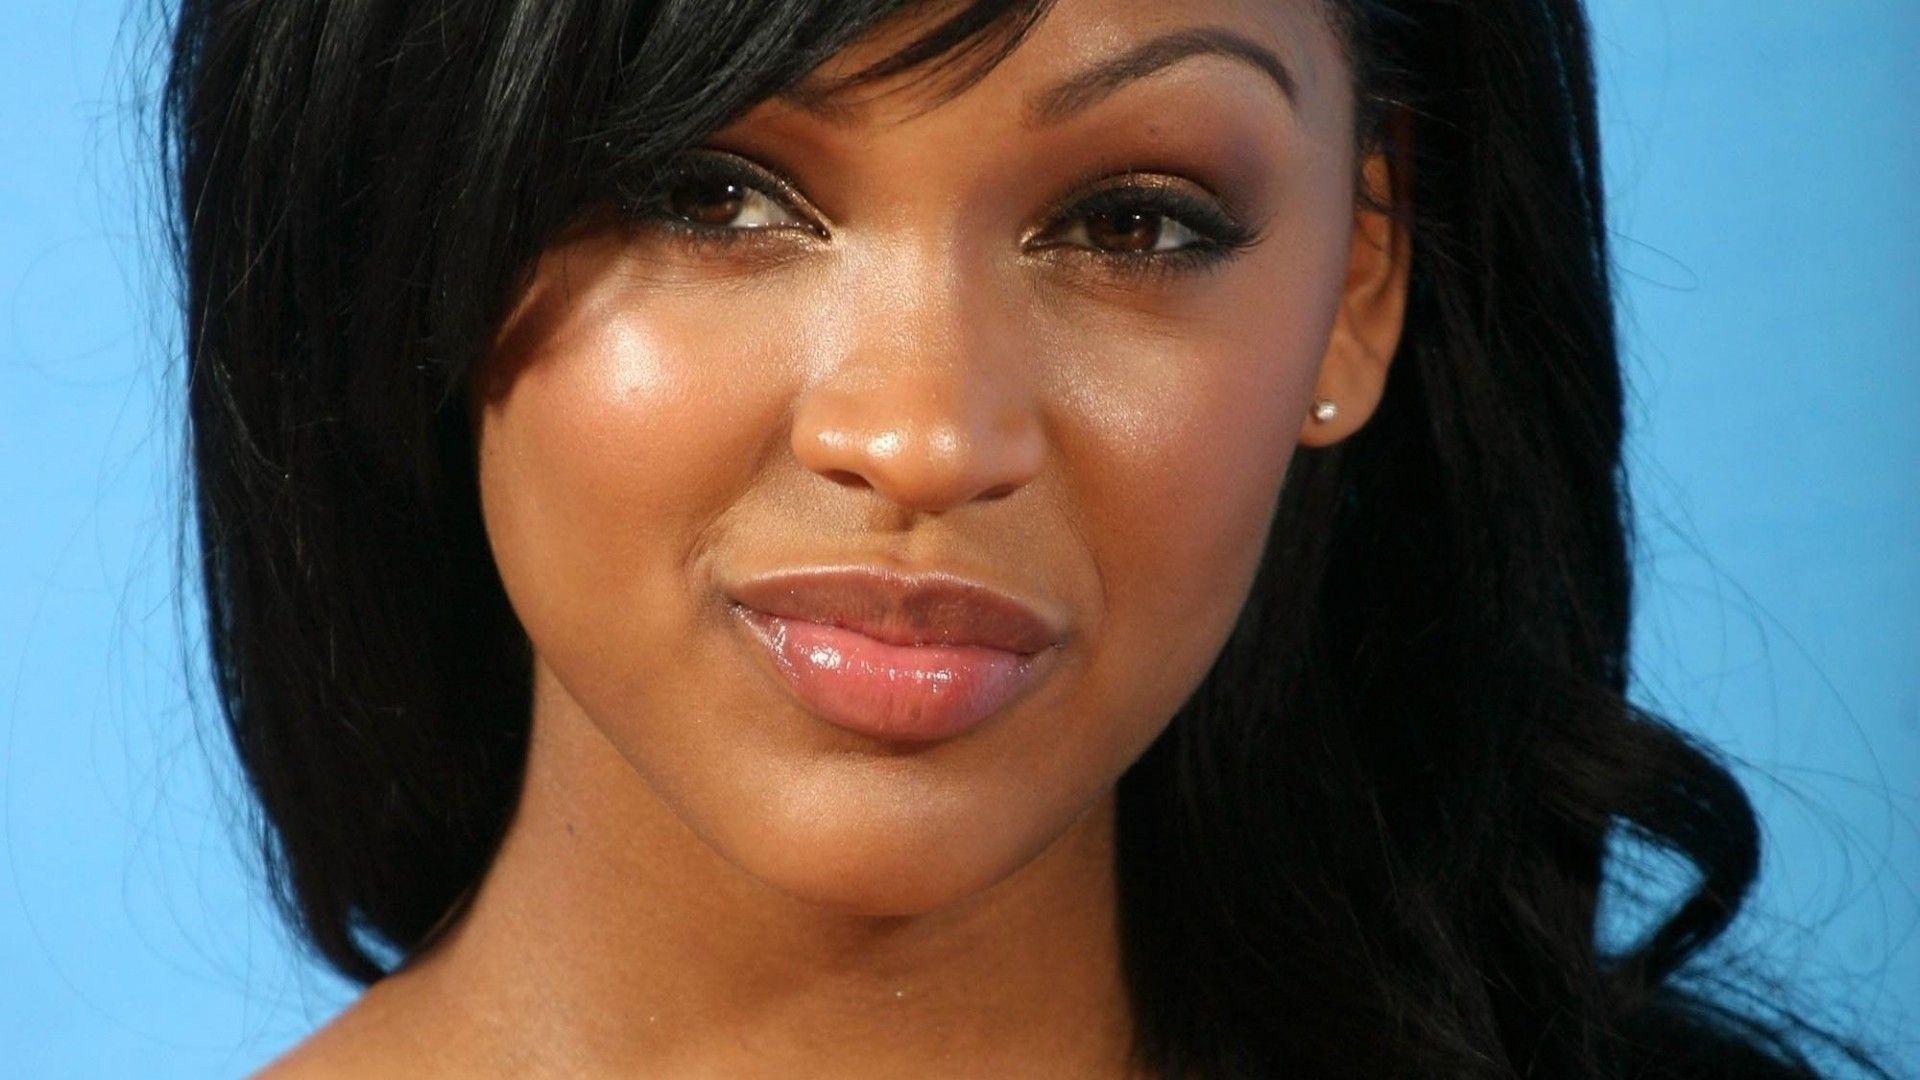 Meagan good homemade sex pictures